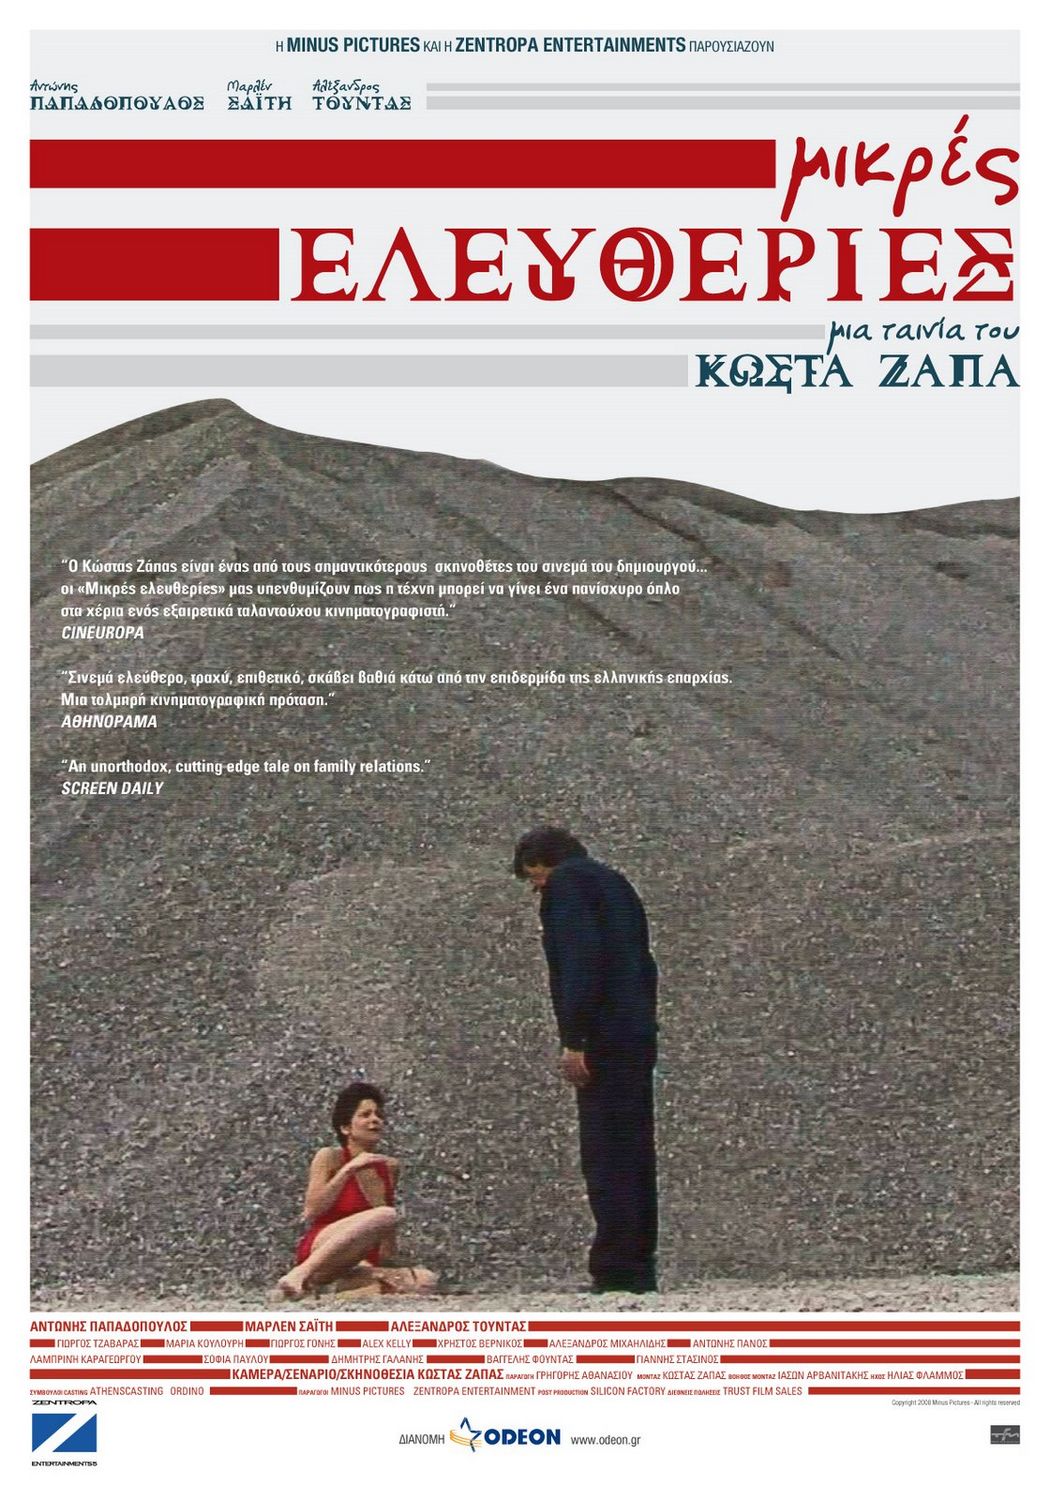 Extra Large Movie Poster Image for Mikres eleftheries 